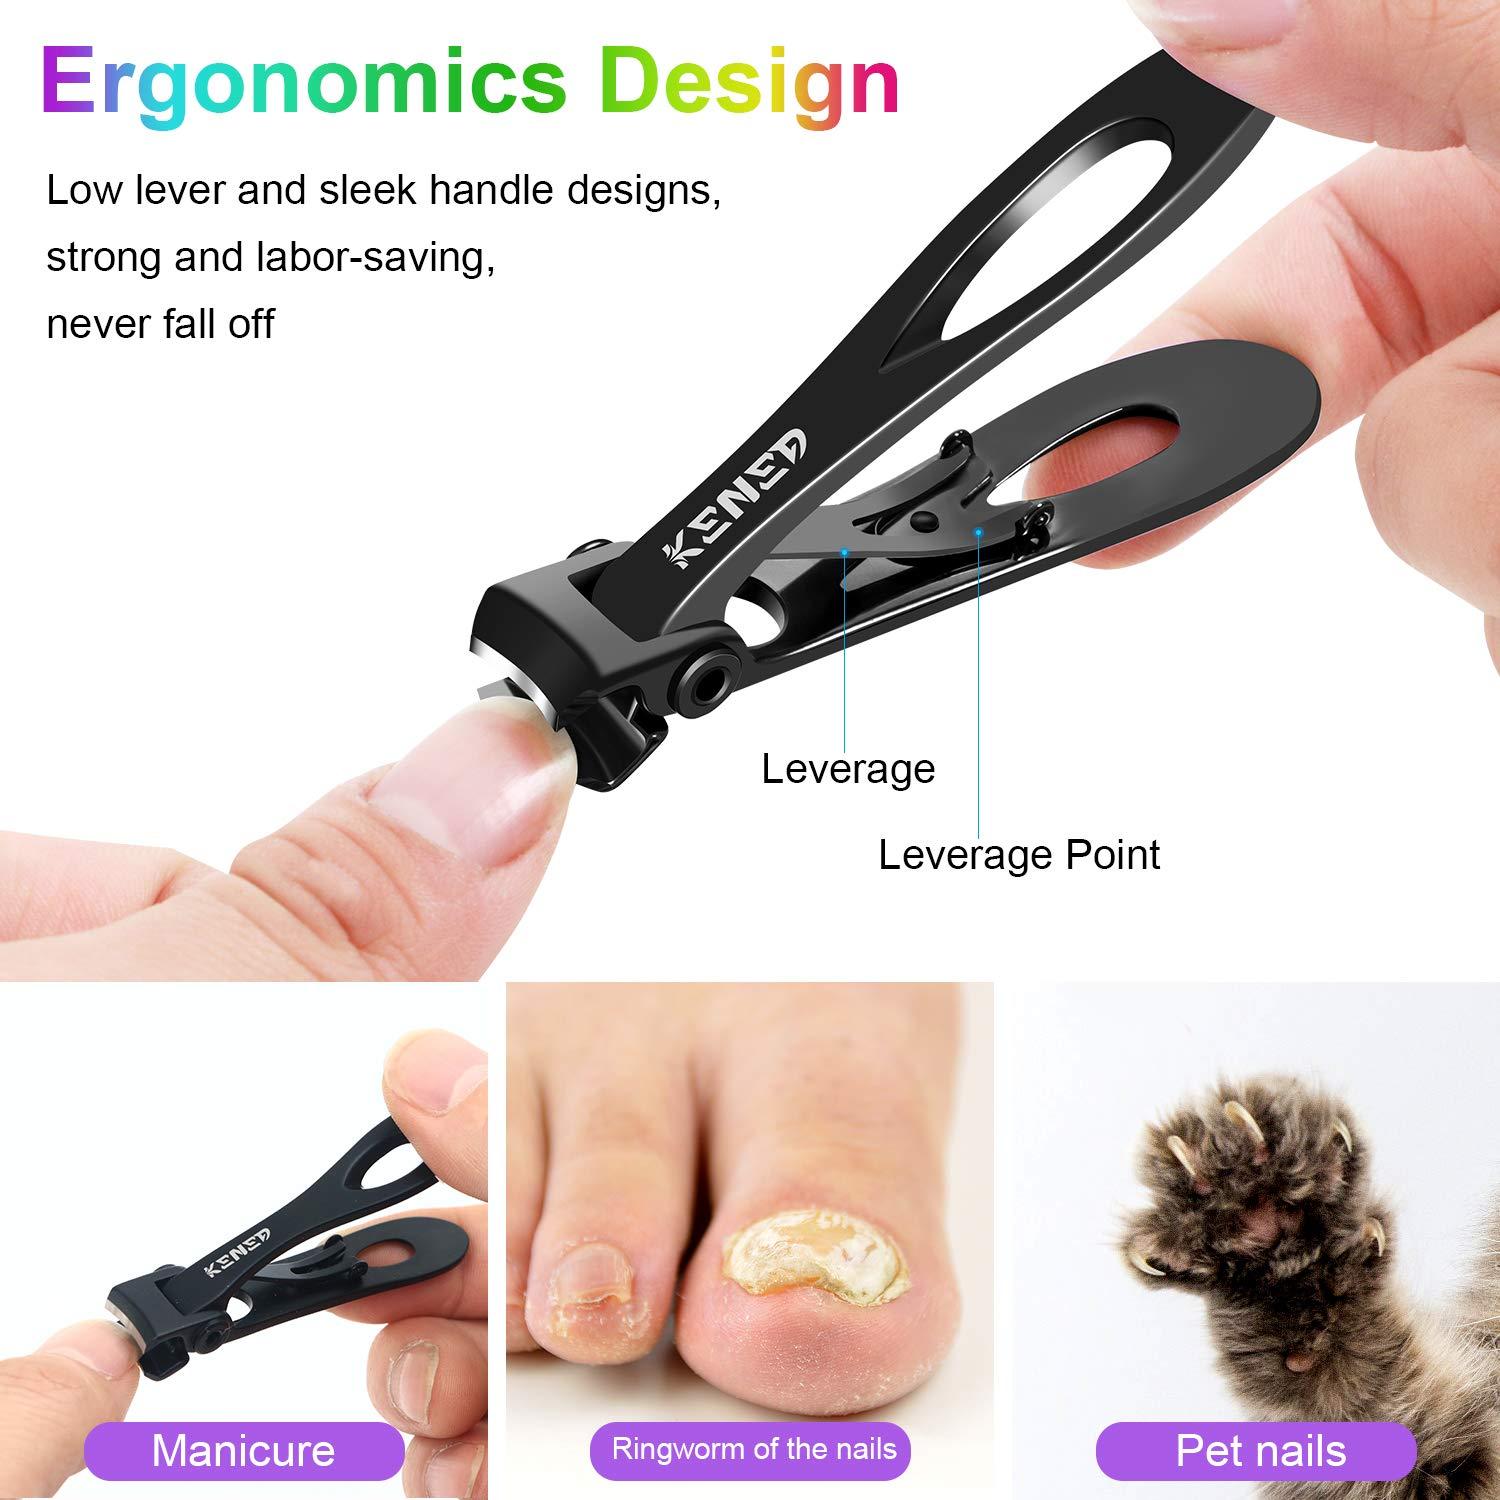 Finger Nail Clip Set [4 Piece] - Toenail Clippers for Thick Nails